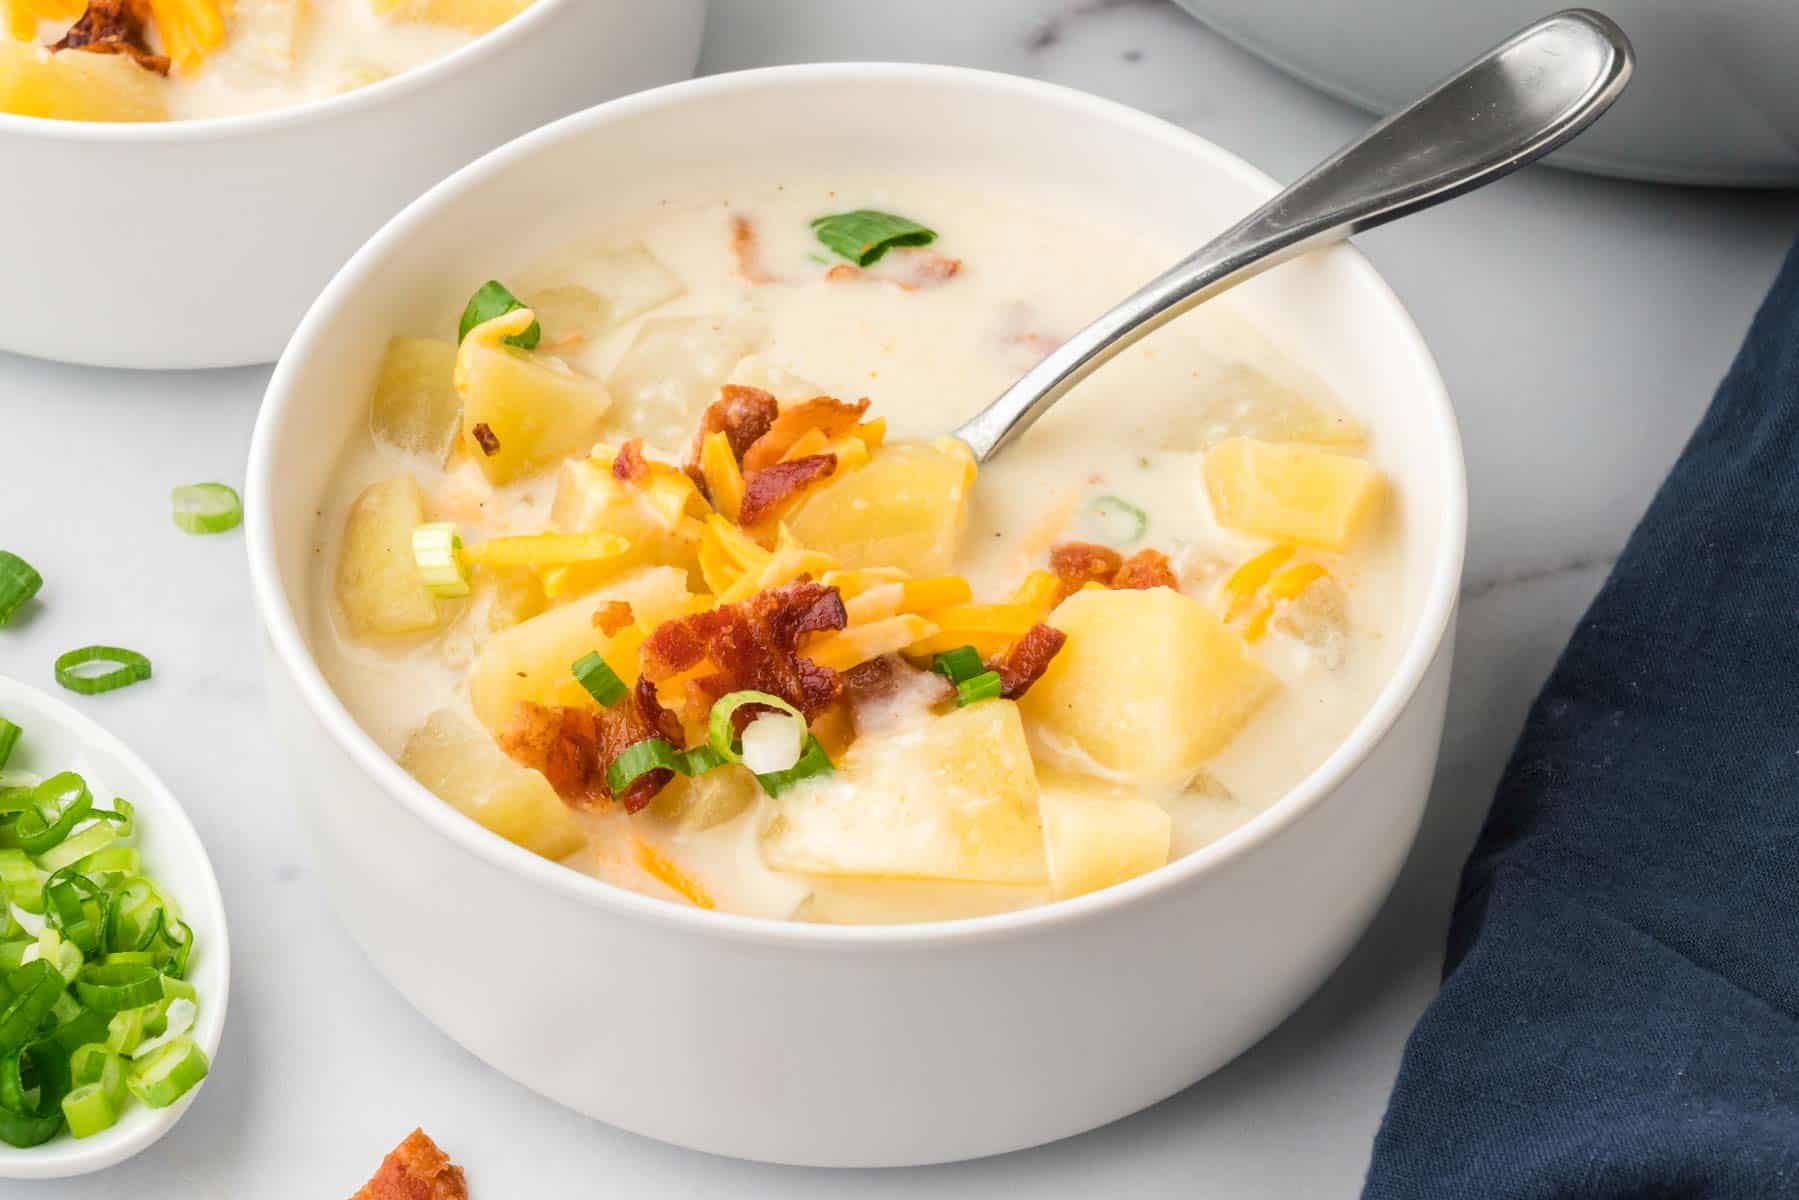 A white bowl holds cream of potato soup topped with colorful garnishes and a spoon is inserted into it.